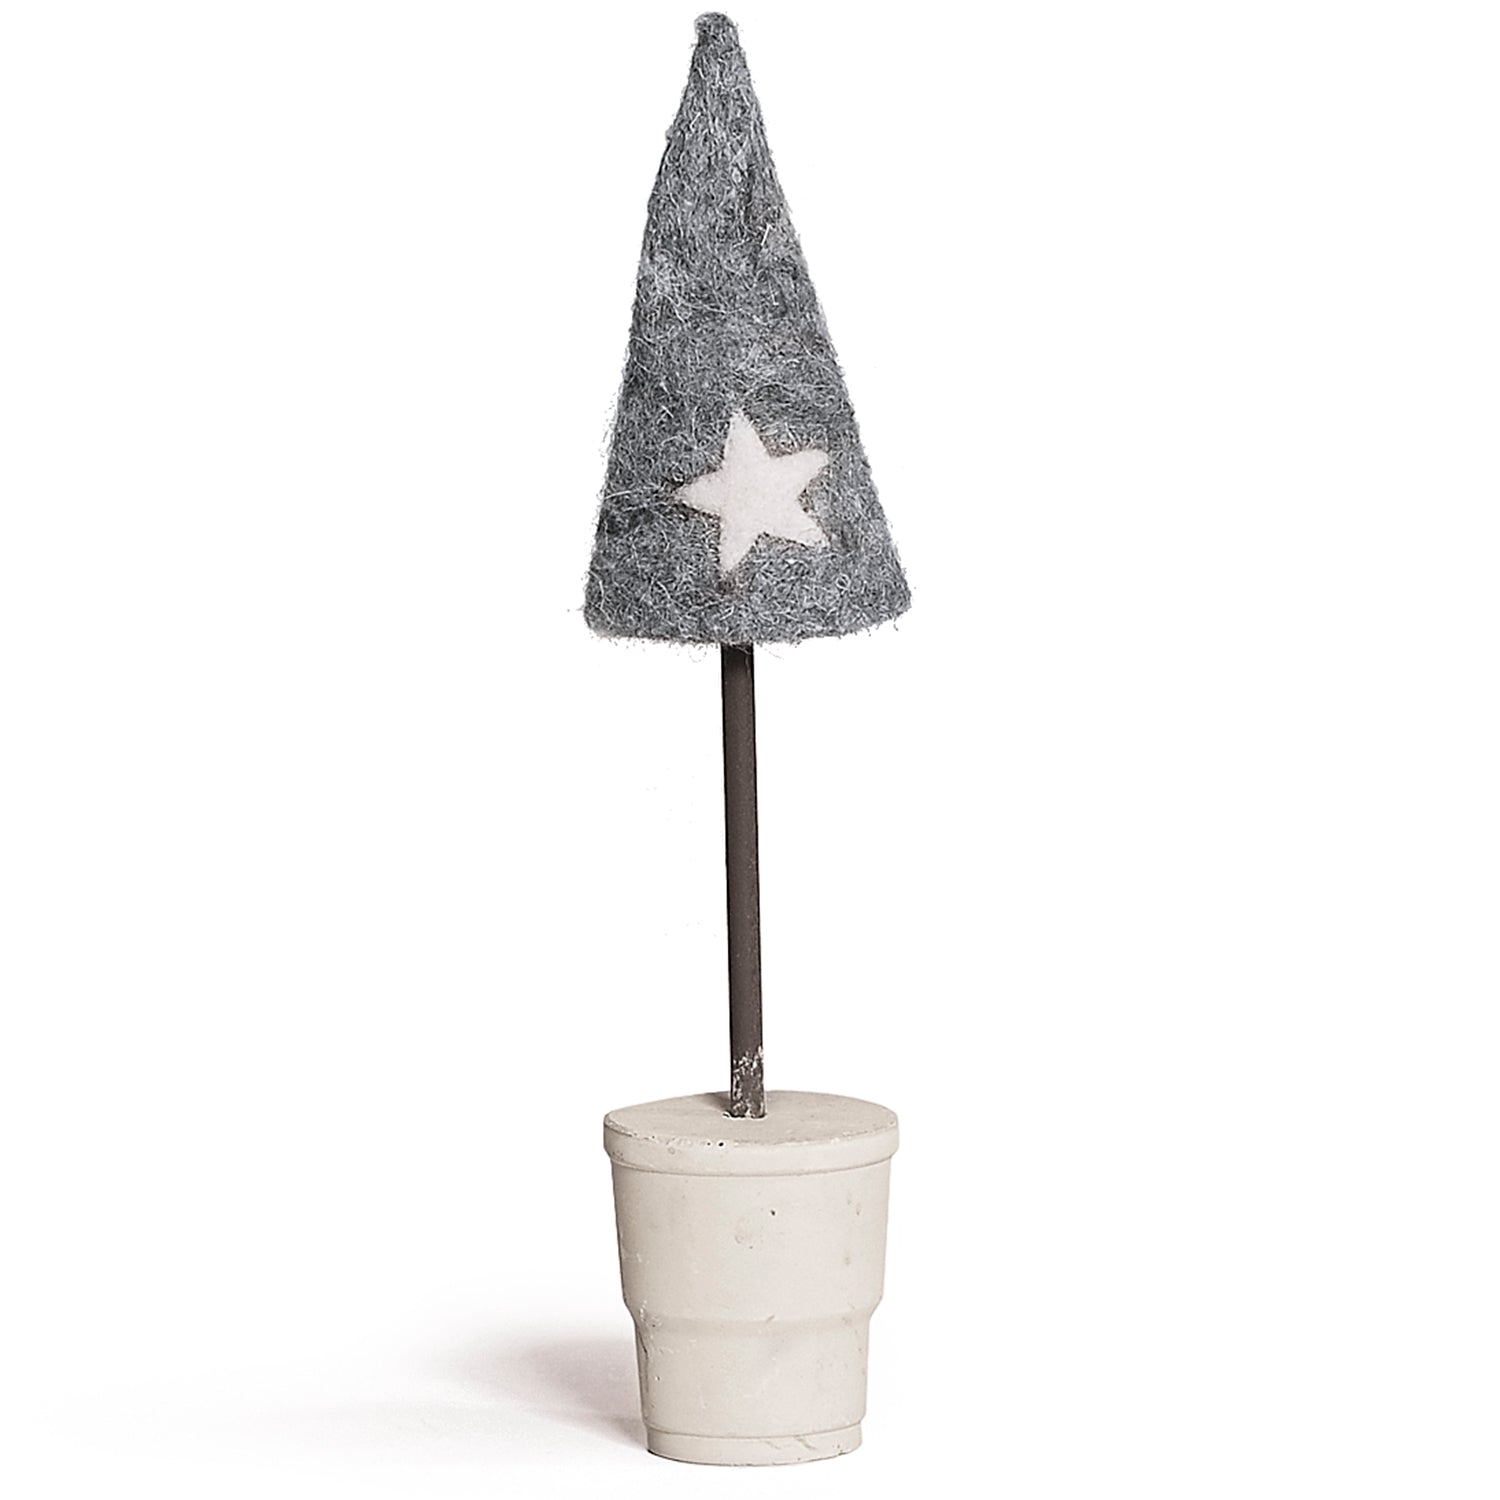 SILVER TREE WITH STAR ORNAMENT